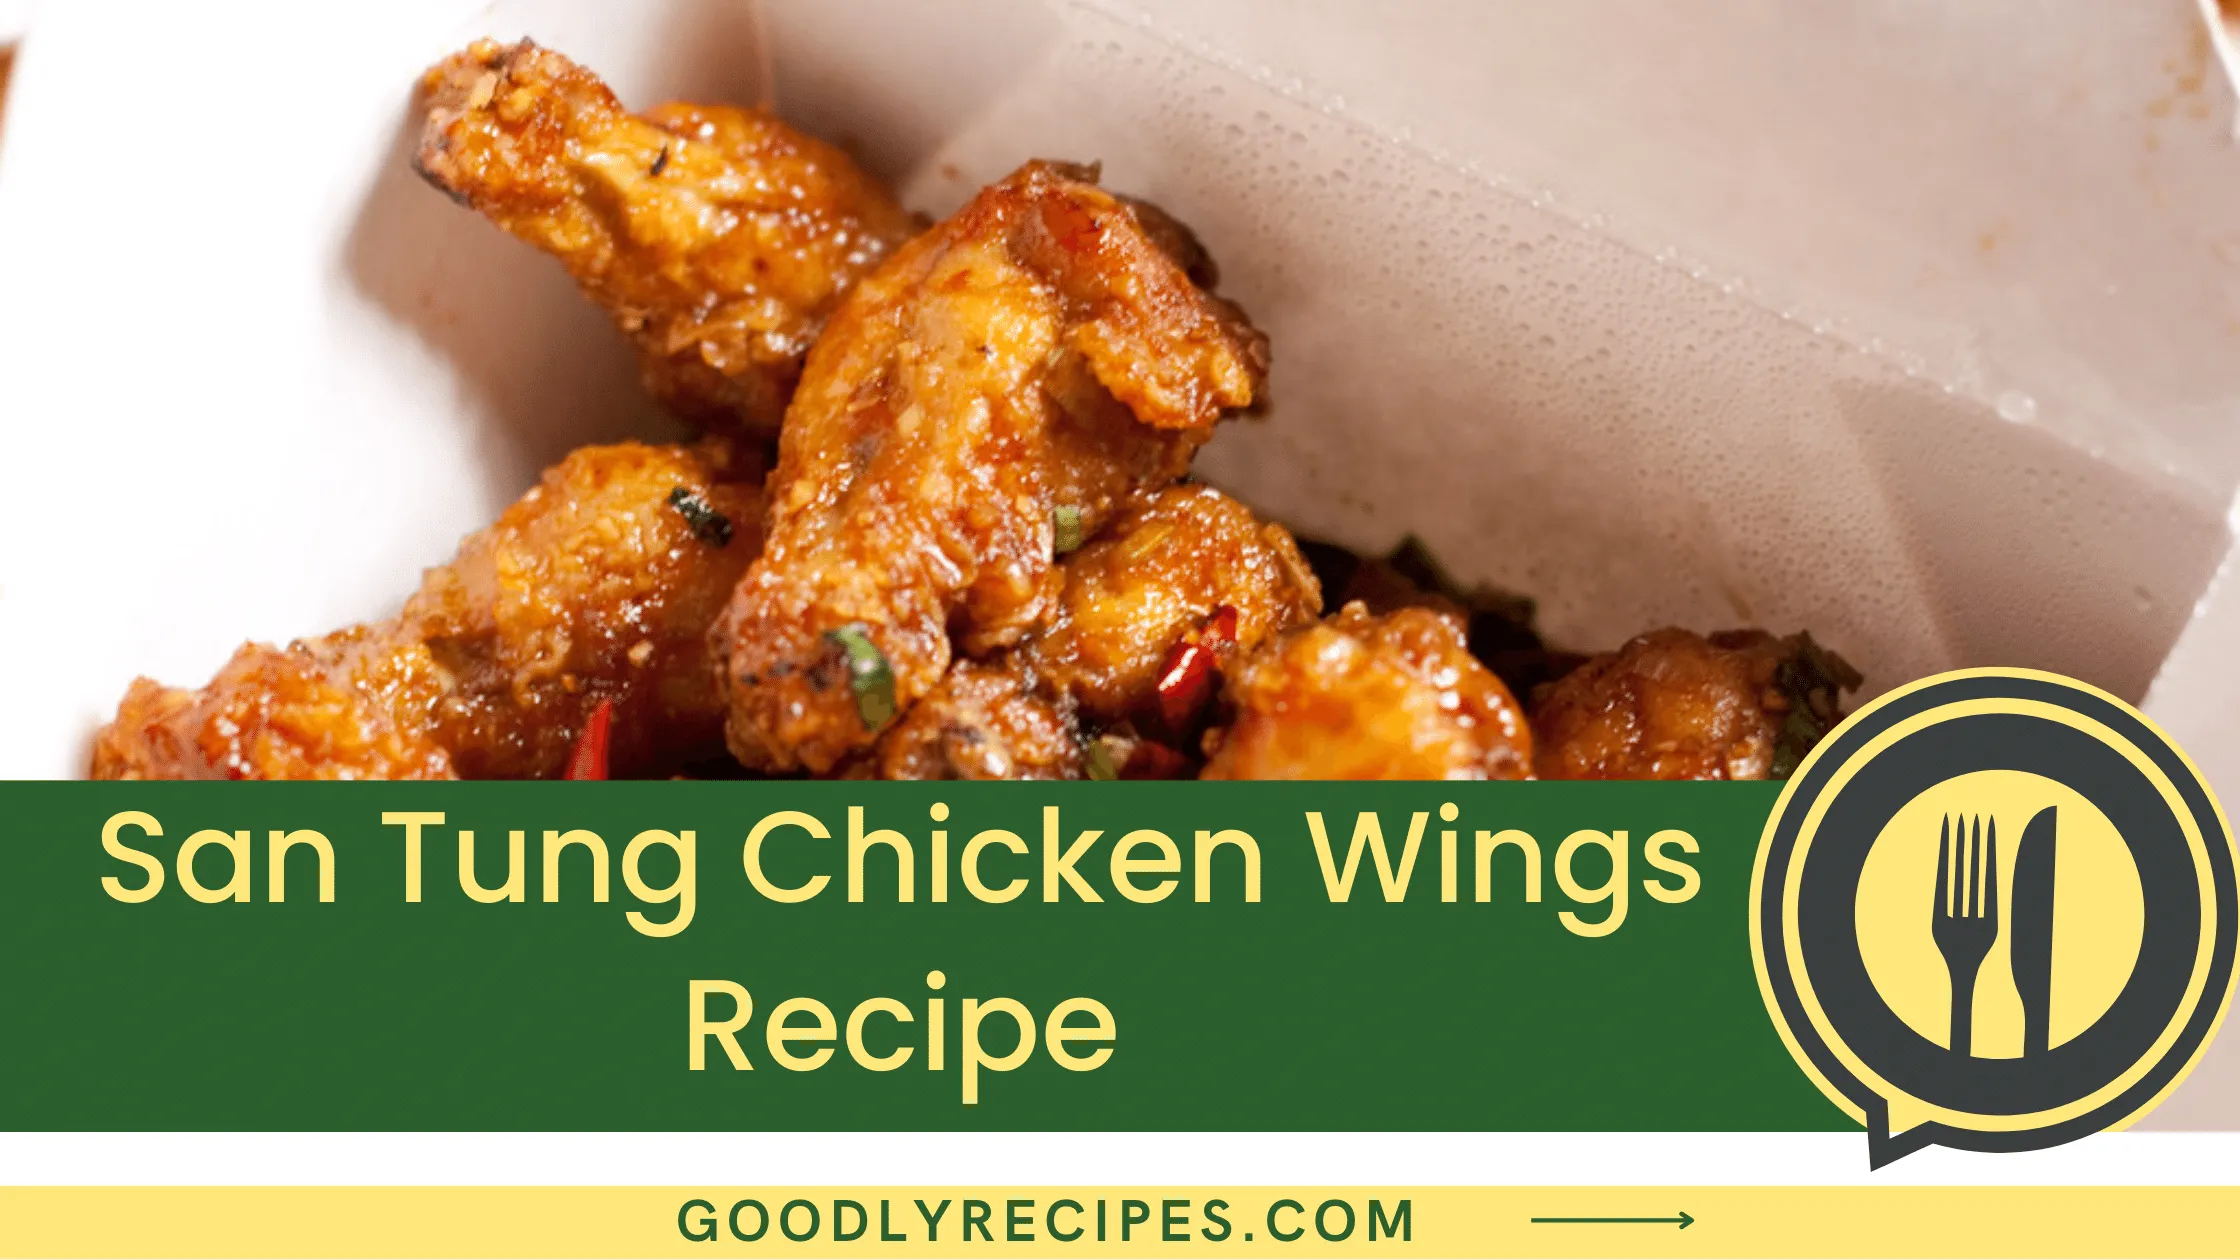 San Tung Chicken Wings Recipe - Step By Step Easy Guide